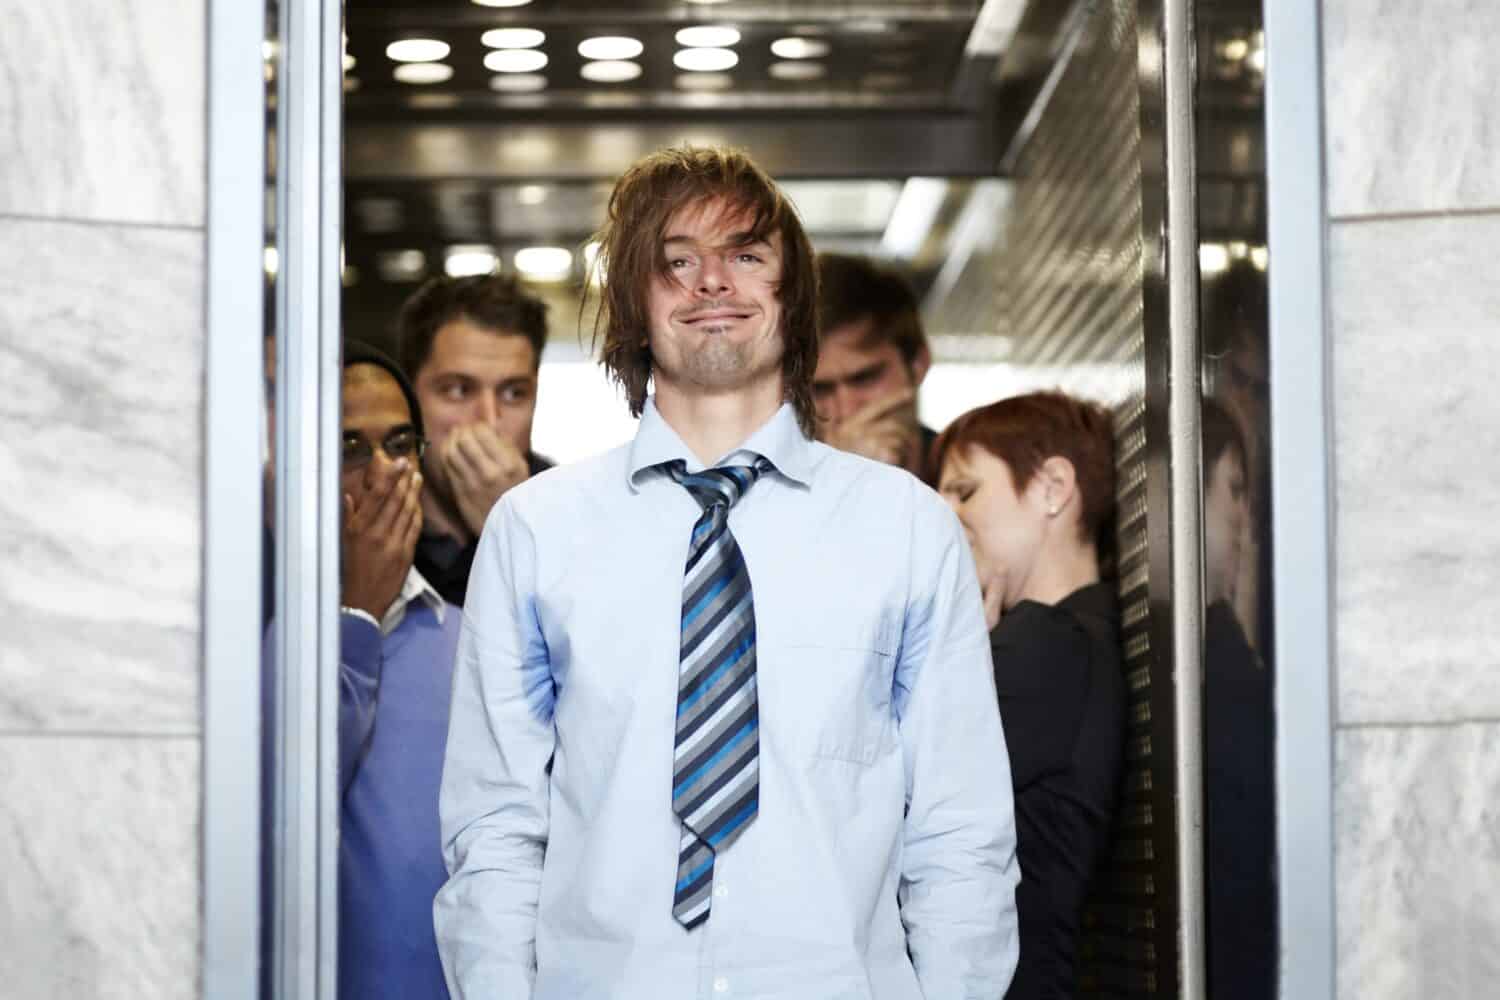 He needs a shower. A dirty young businessman affecting his coworkers in an elevator.